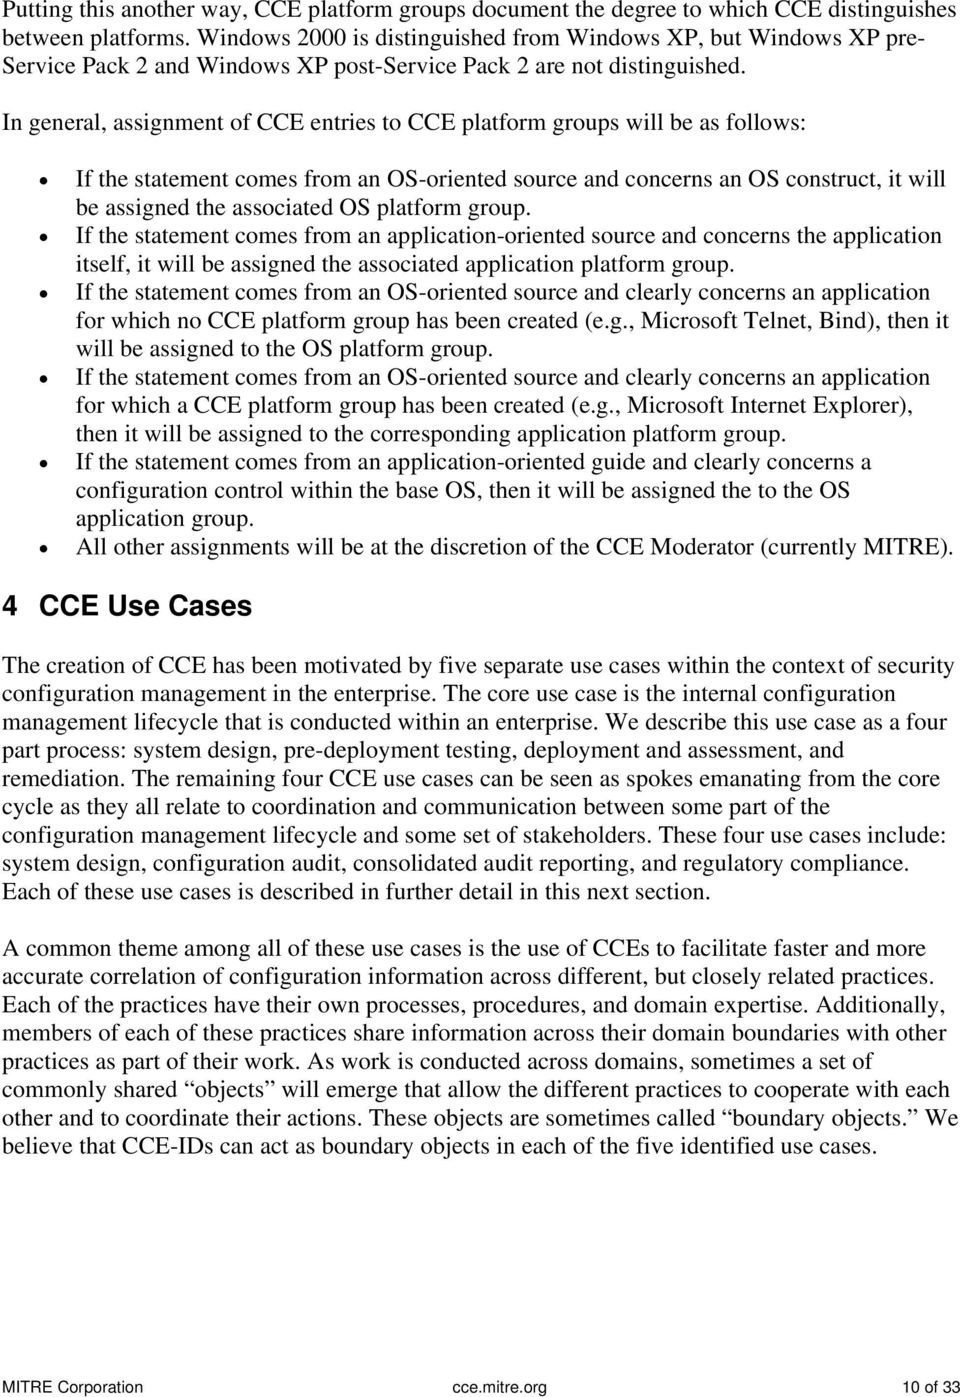 In general, assignment of CCE entries to CCE platform groups will be as follows: If the statement comes from an OS-oriented source and concerns an OS construct, it will be assigned the associated OS